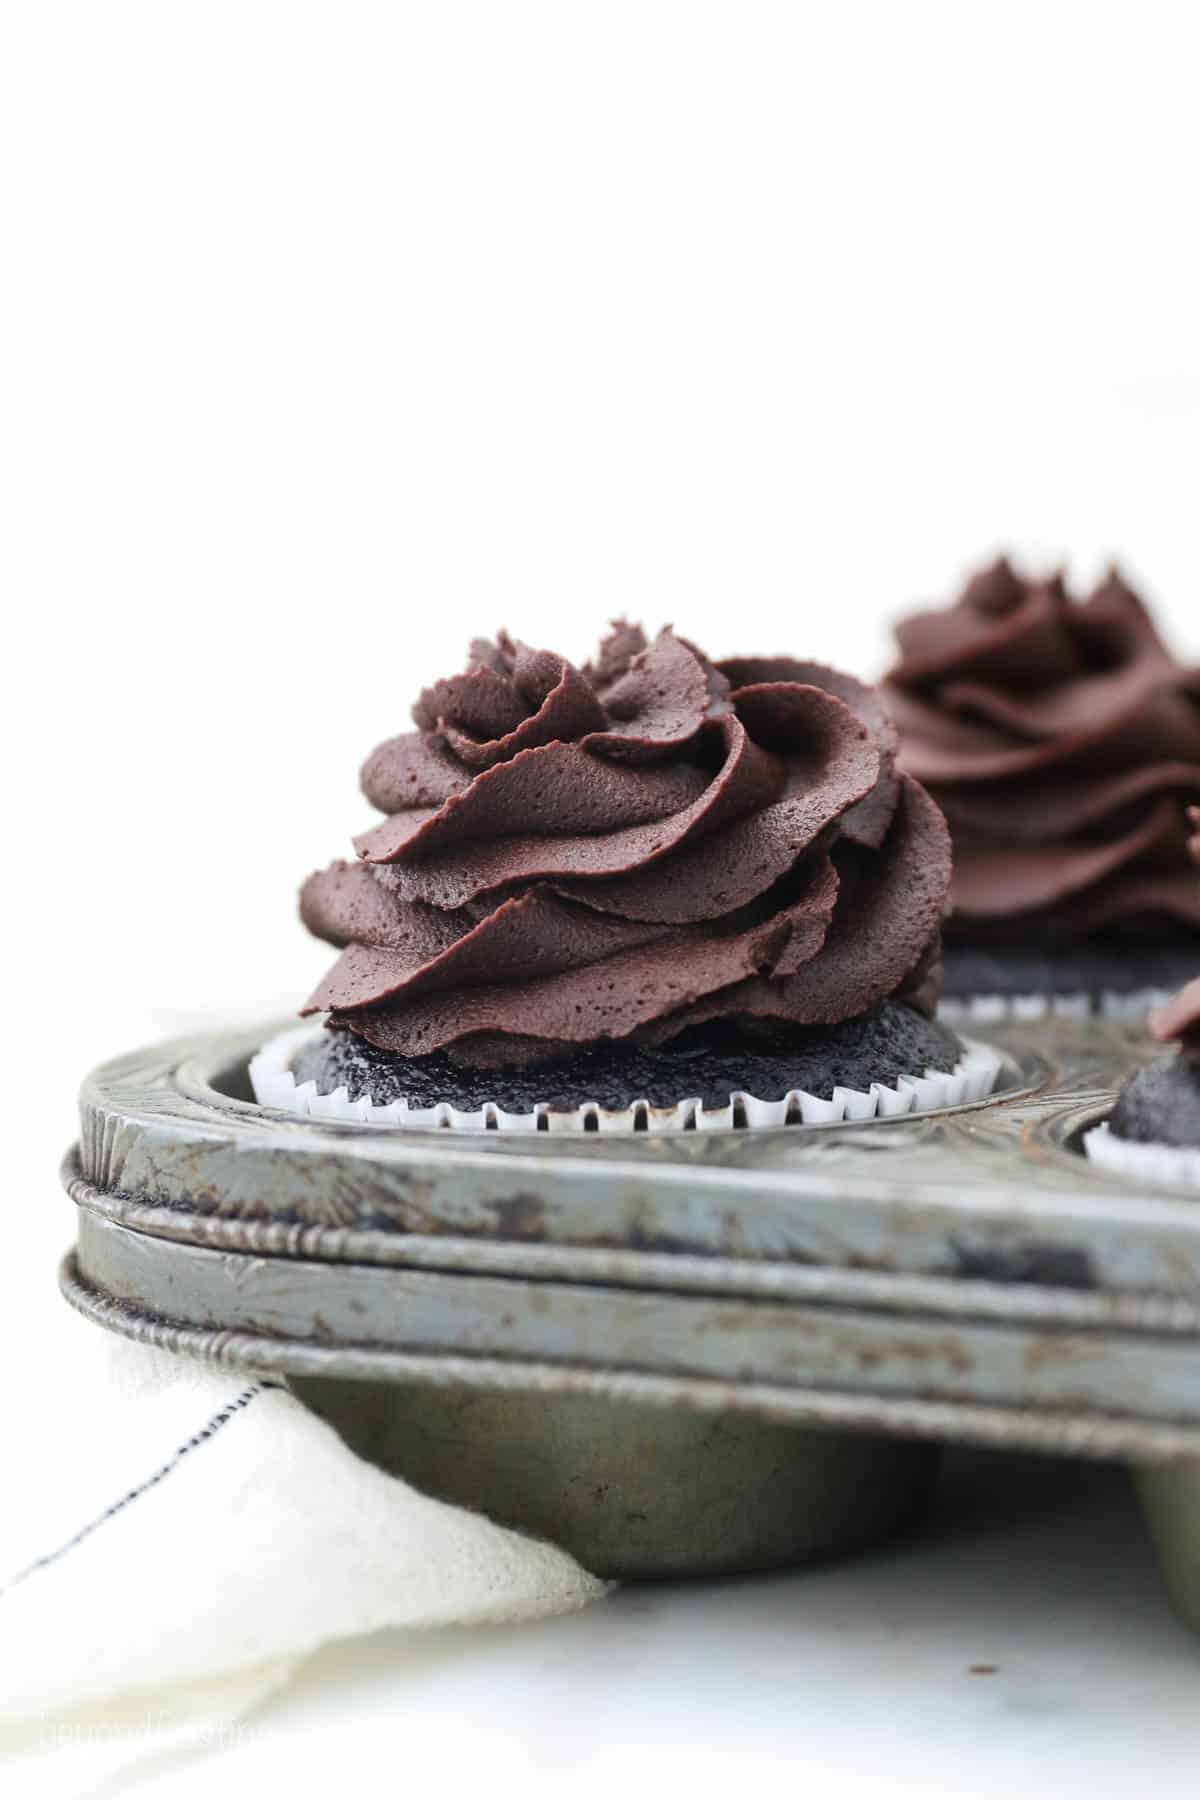 a vintage cupcake pan with a frosted chocolate cupcake